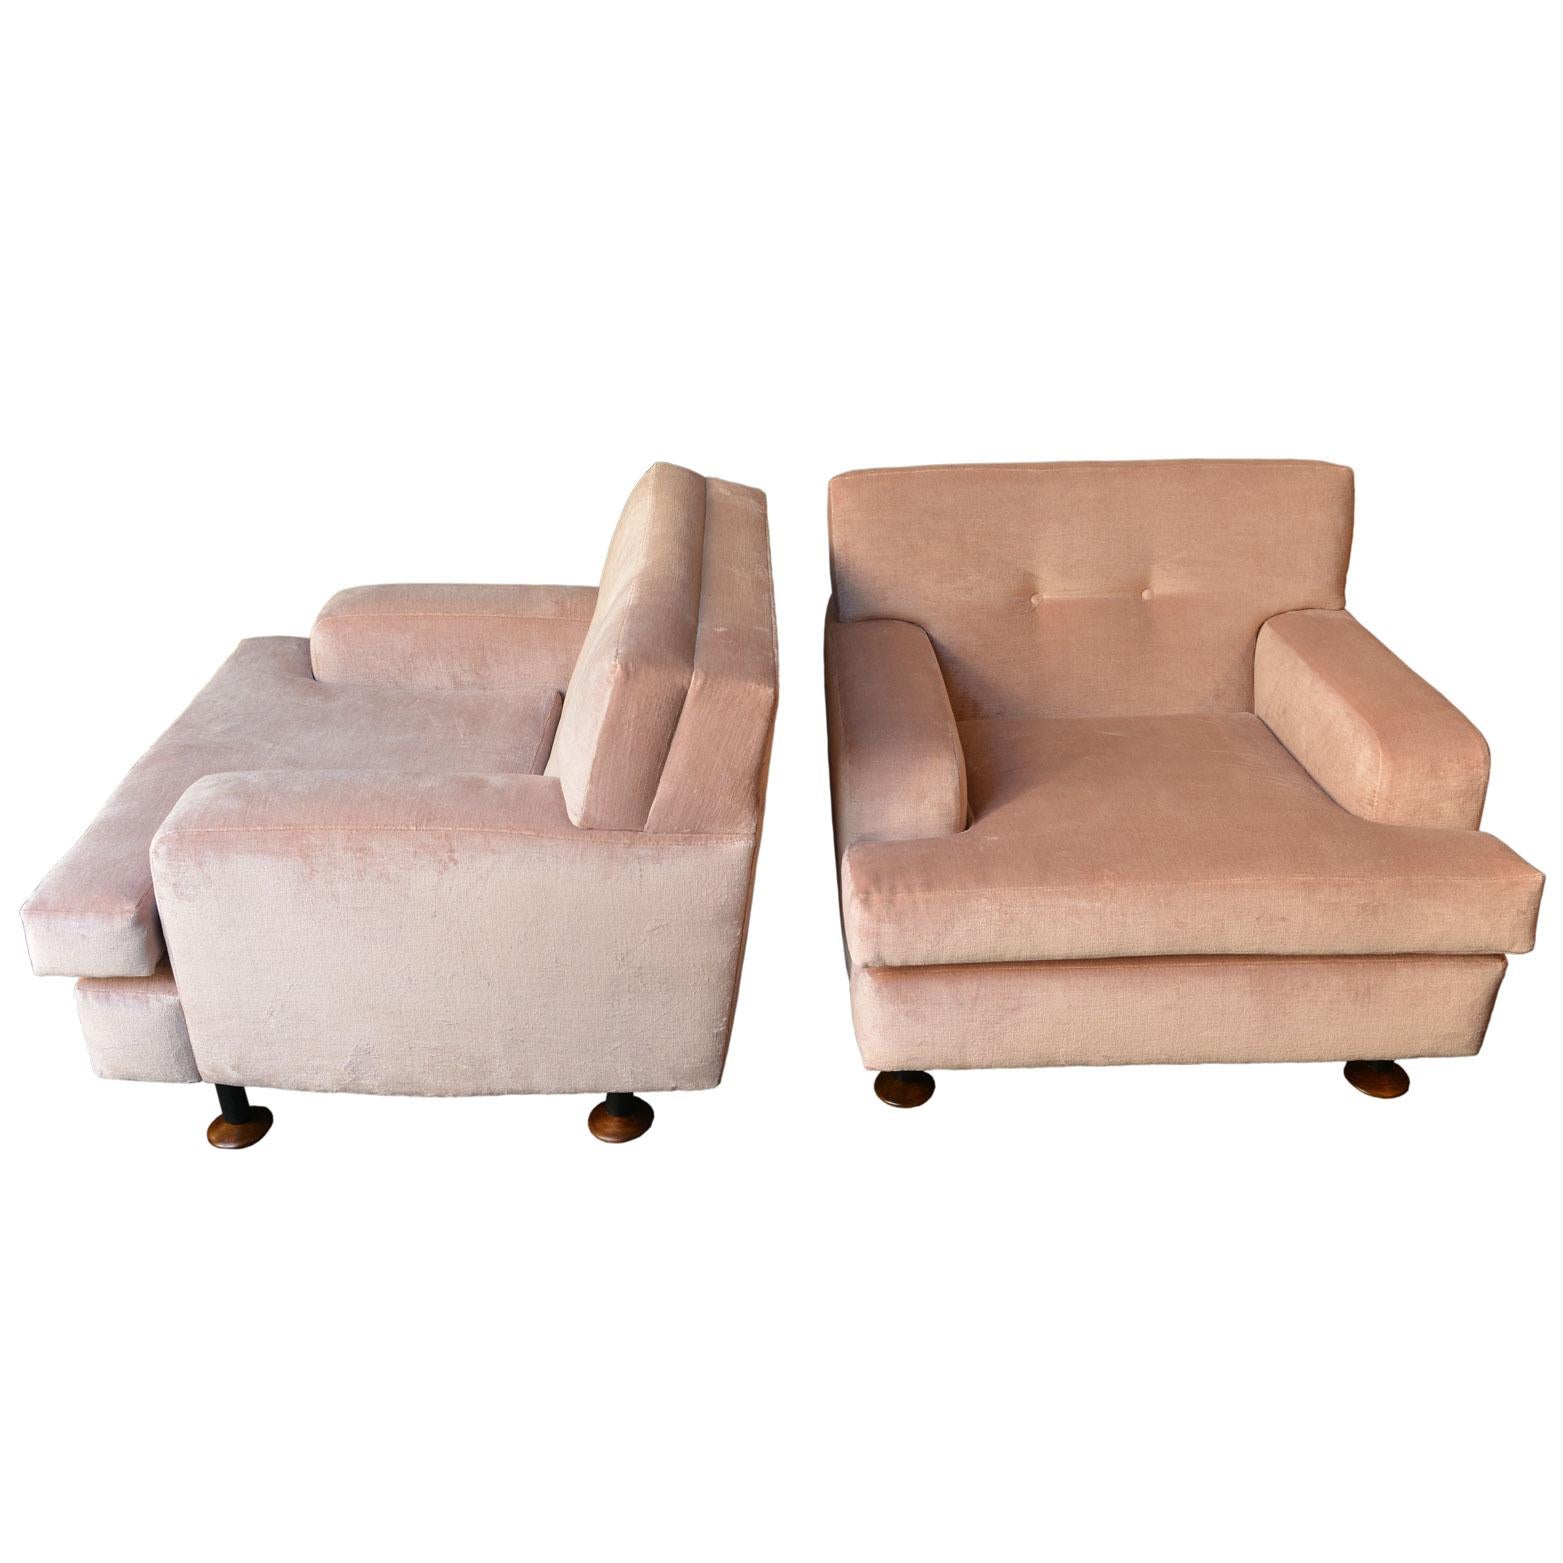 Pair of Pink "Square" Armchairs by Marco Zanuso for Arflex, Italy, Early 1960s